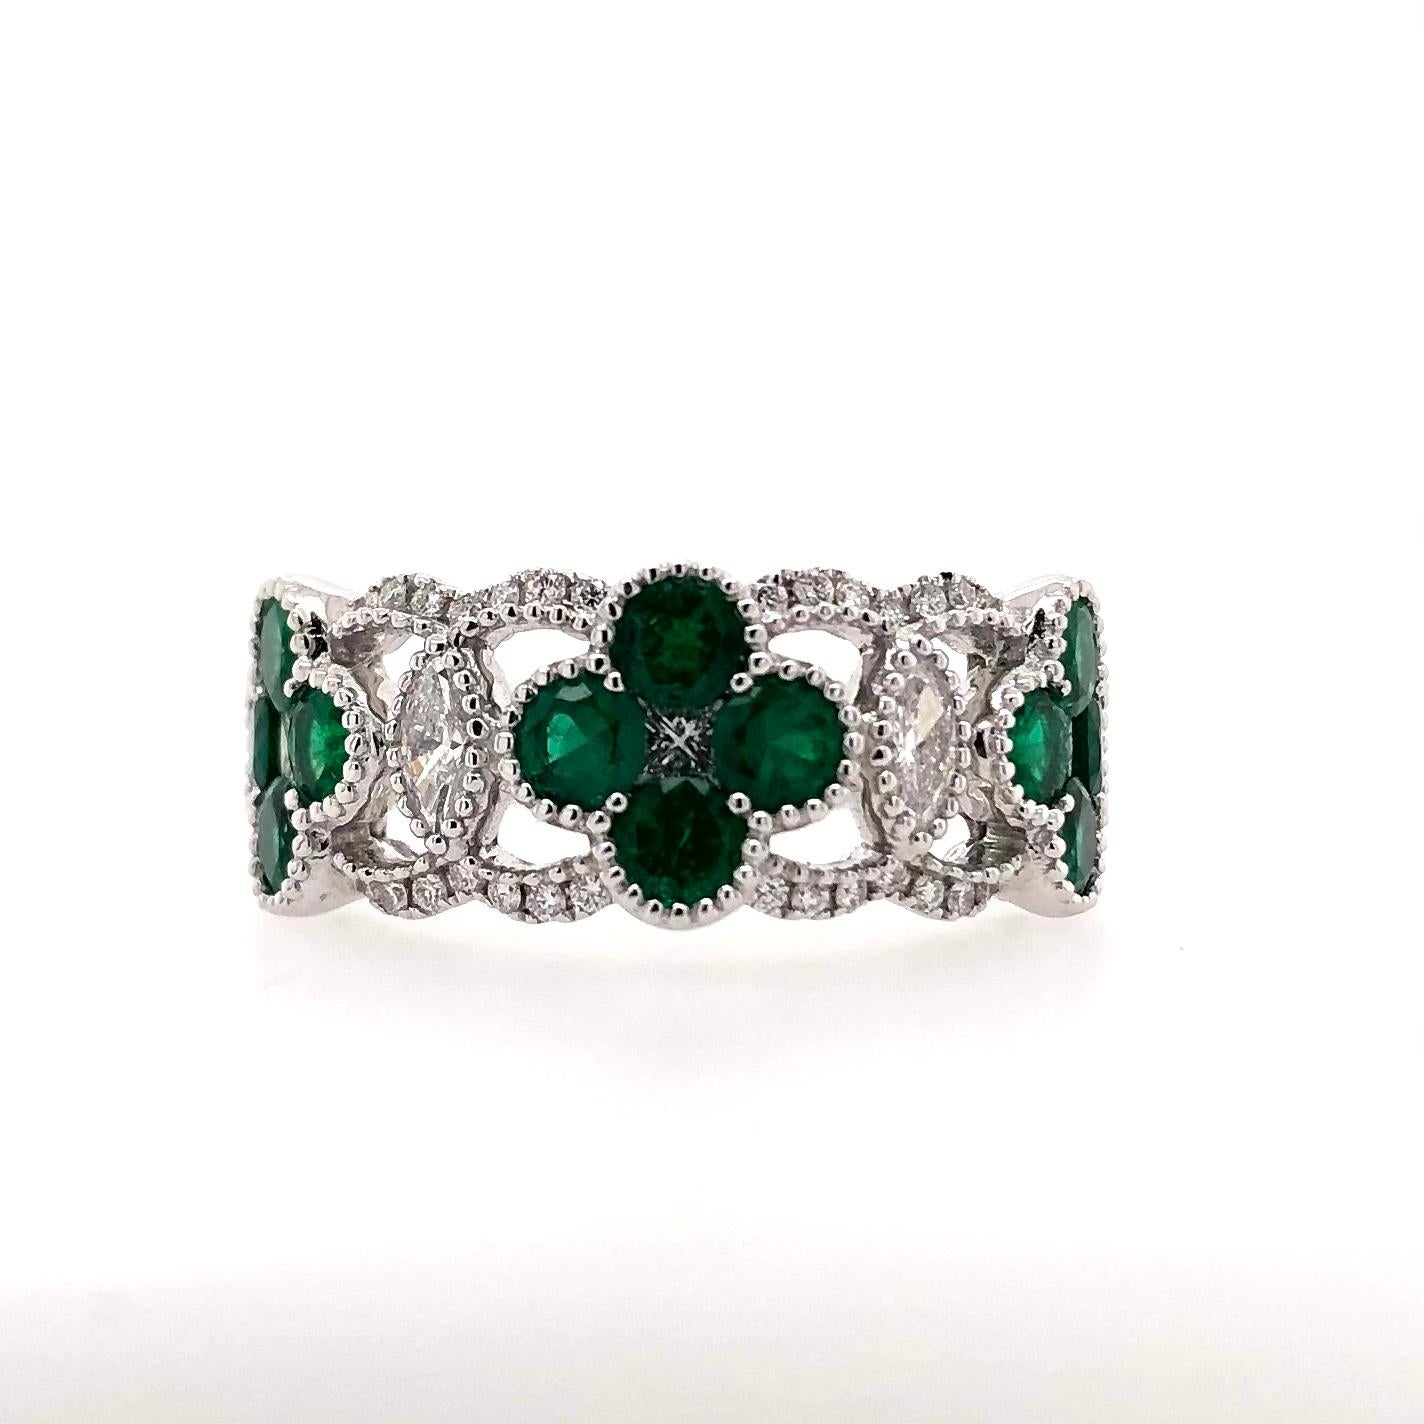 PARIS Craft House Emerald Clover Ring. Featured in this article are these 1.12ct beautiful Emeralds done in Round cutting. Clustered together, they make trio silhouettes of a lucky clover. Crafted in 18 Karat White Gold, they are showered with